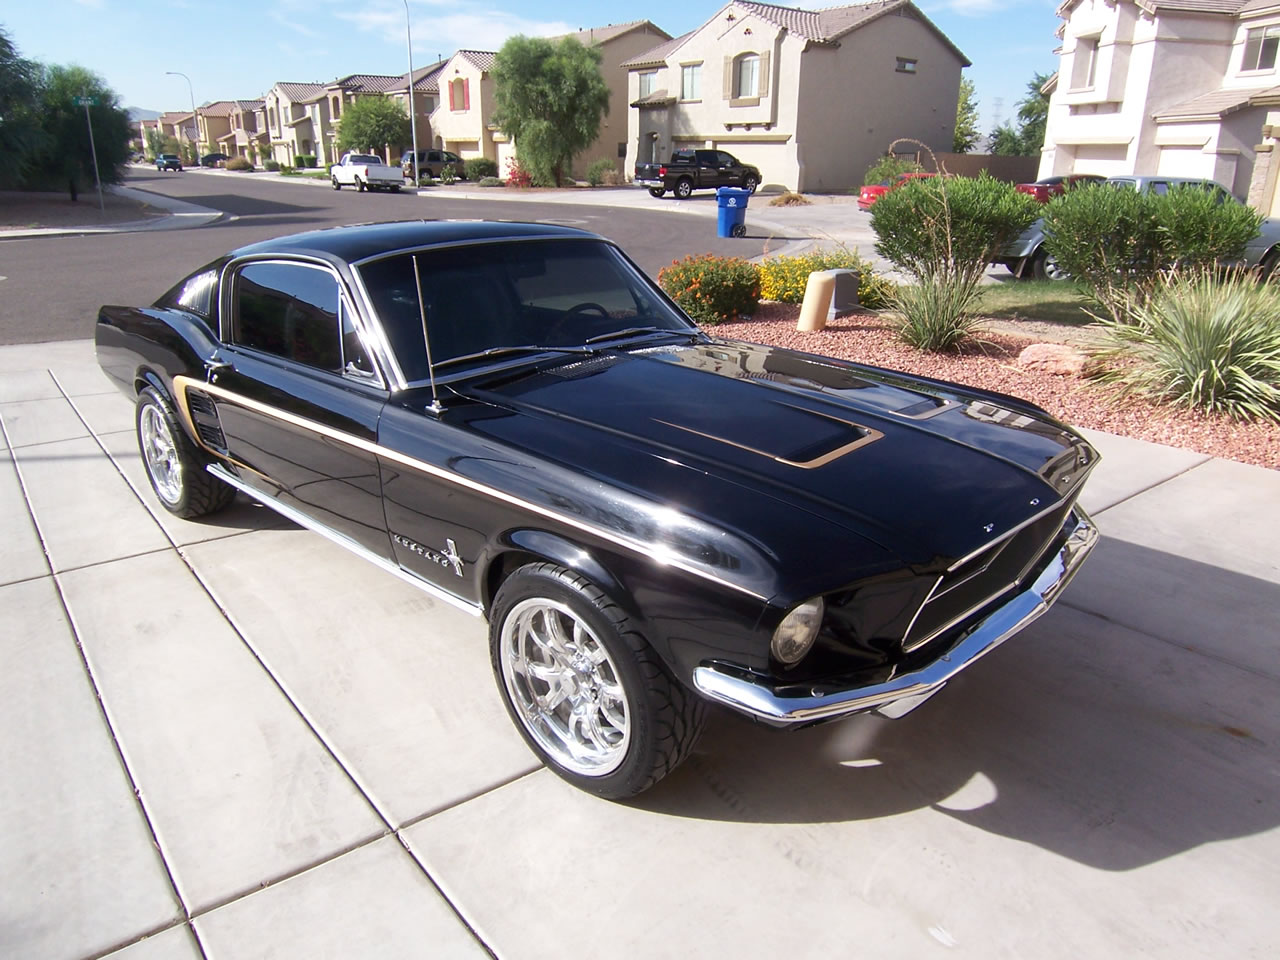 1967 Ford mustang fastback for sale in canada #5